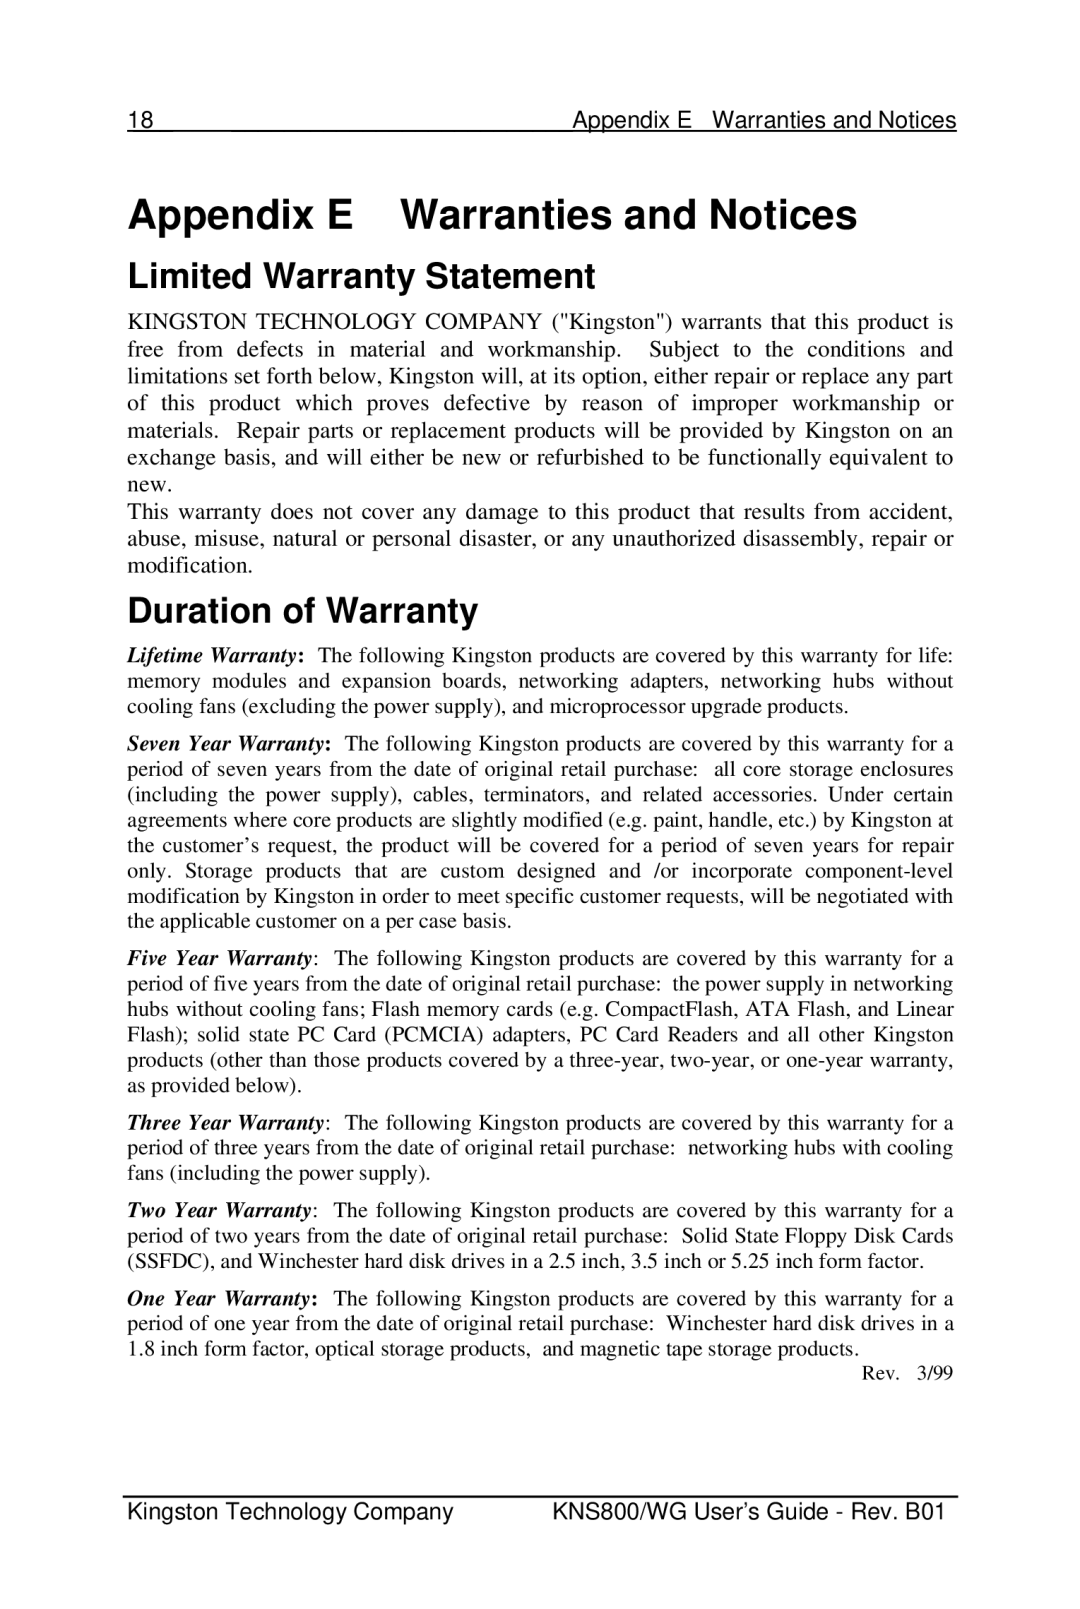 Kingston Technology KNS800/WG manual Appendix E Warranties and Notices, Limited Warranty Statement, Duration of Warranty 